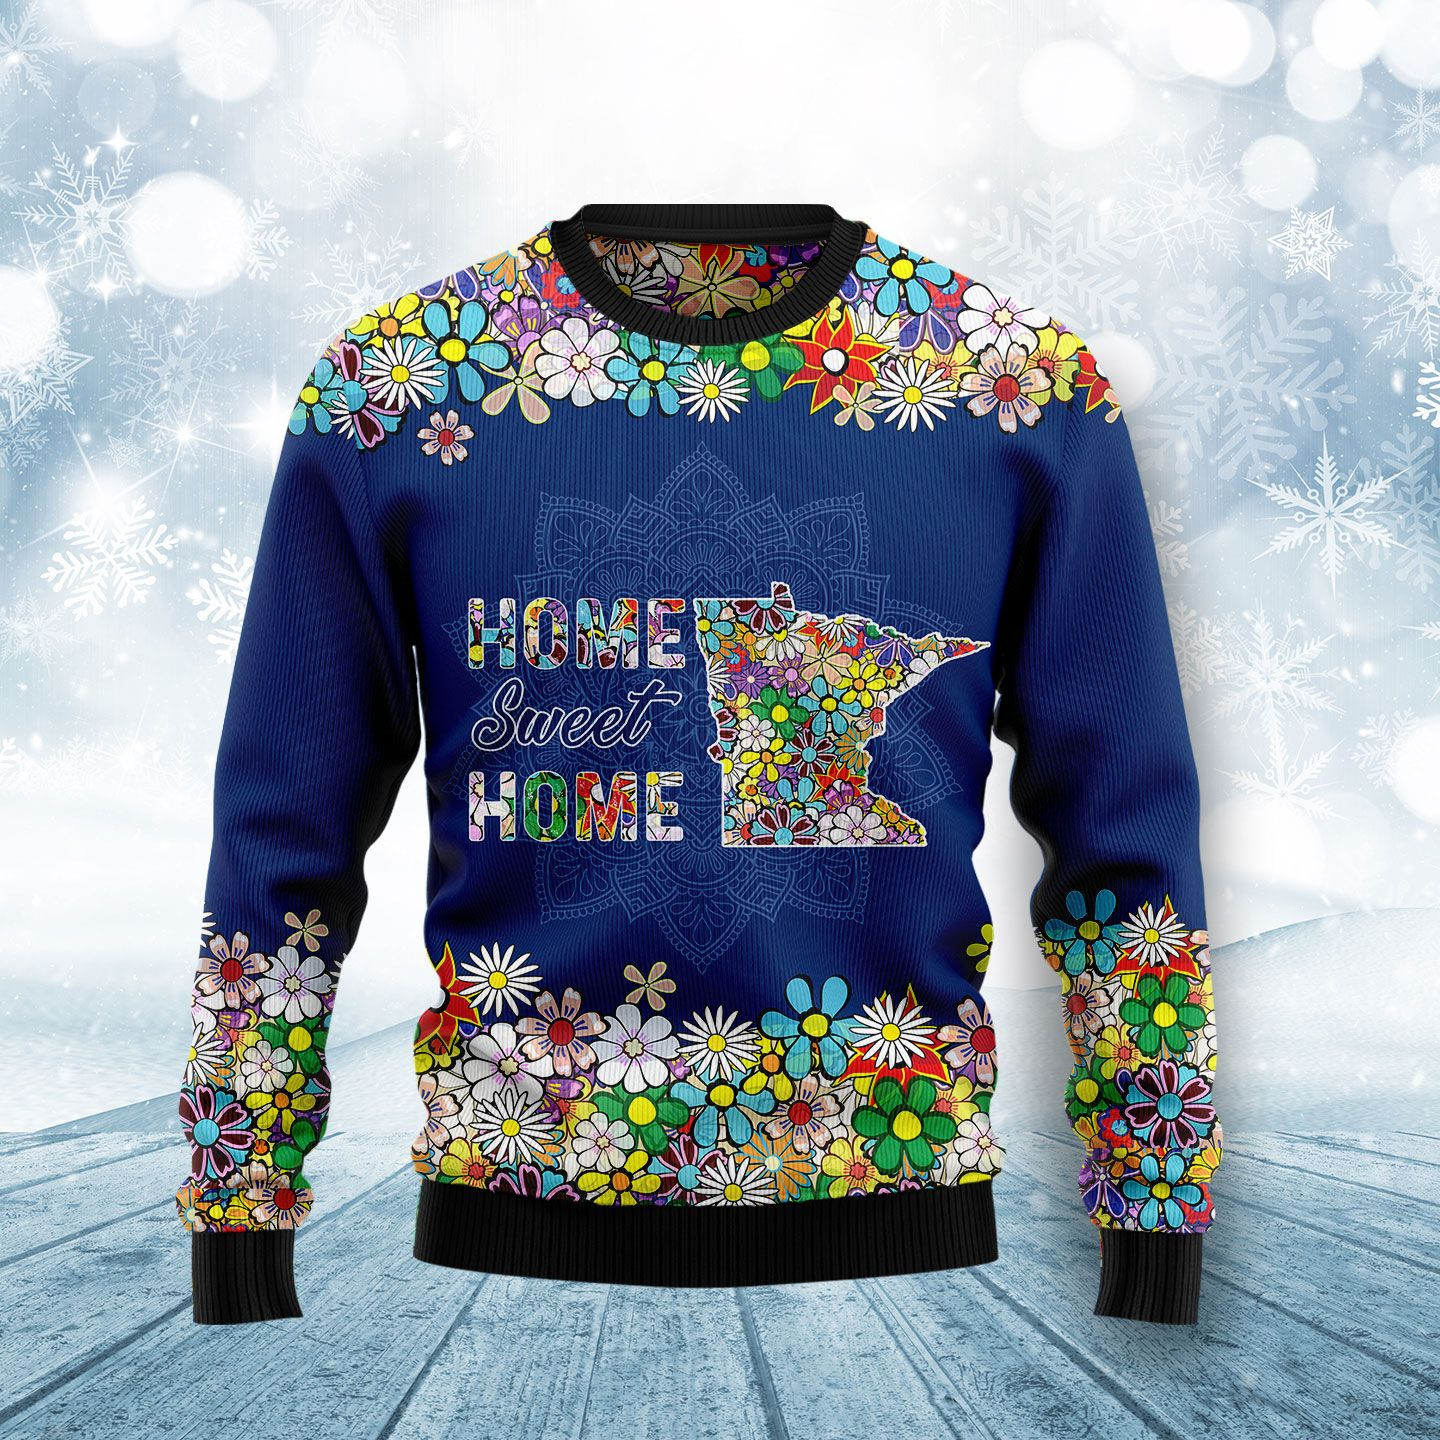 Home Sweet Home Minnesota Flower Ugly Christmas Sweater Ugly Sweater For Men Women, Holiday Sweater